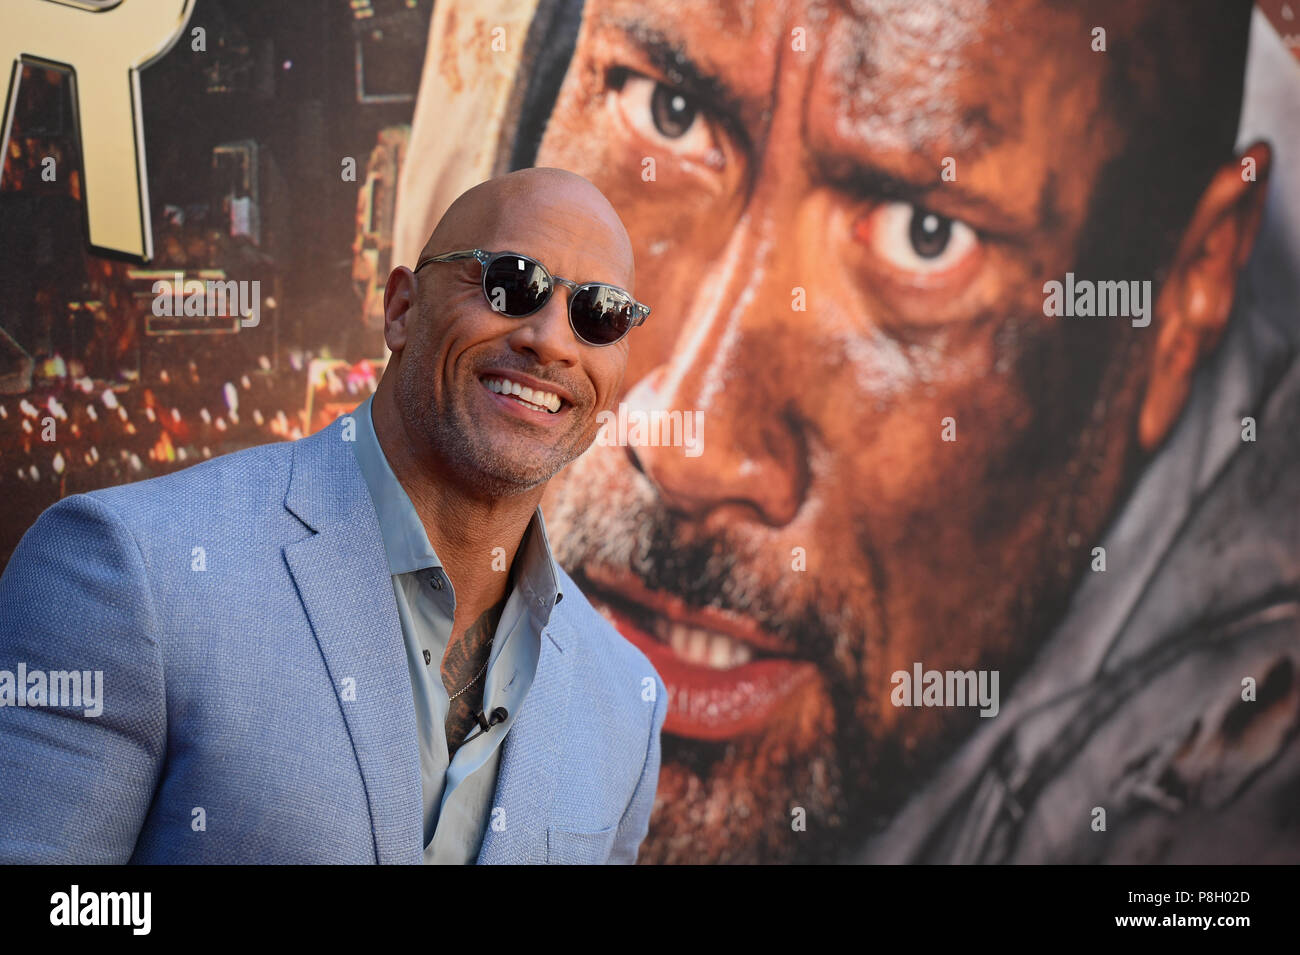 New York, USA. 10th July 2018. Dwayne Johnson attends the 'Skyscraper' New York premiere at AMC Loews Lincoln Square on July 10, 2018 in New York City. Credit: Erik Pendzich/Alamy Live News Stock Photo